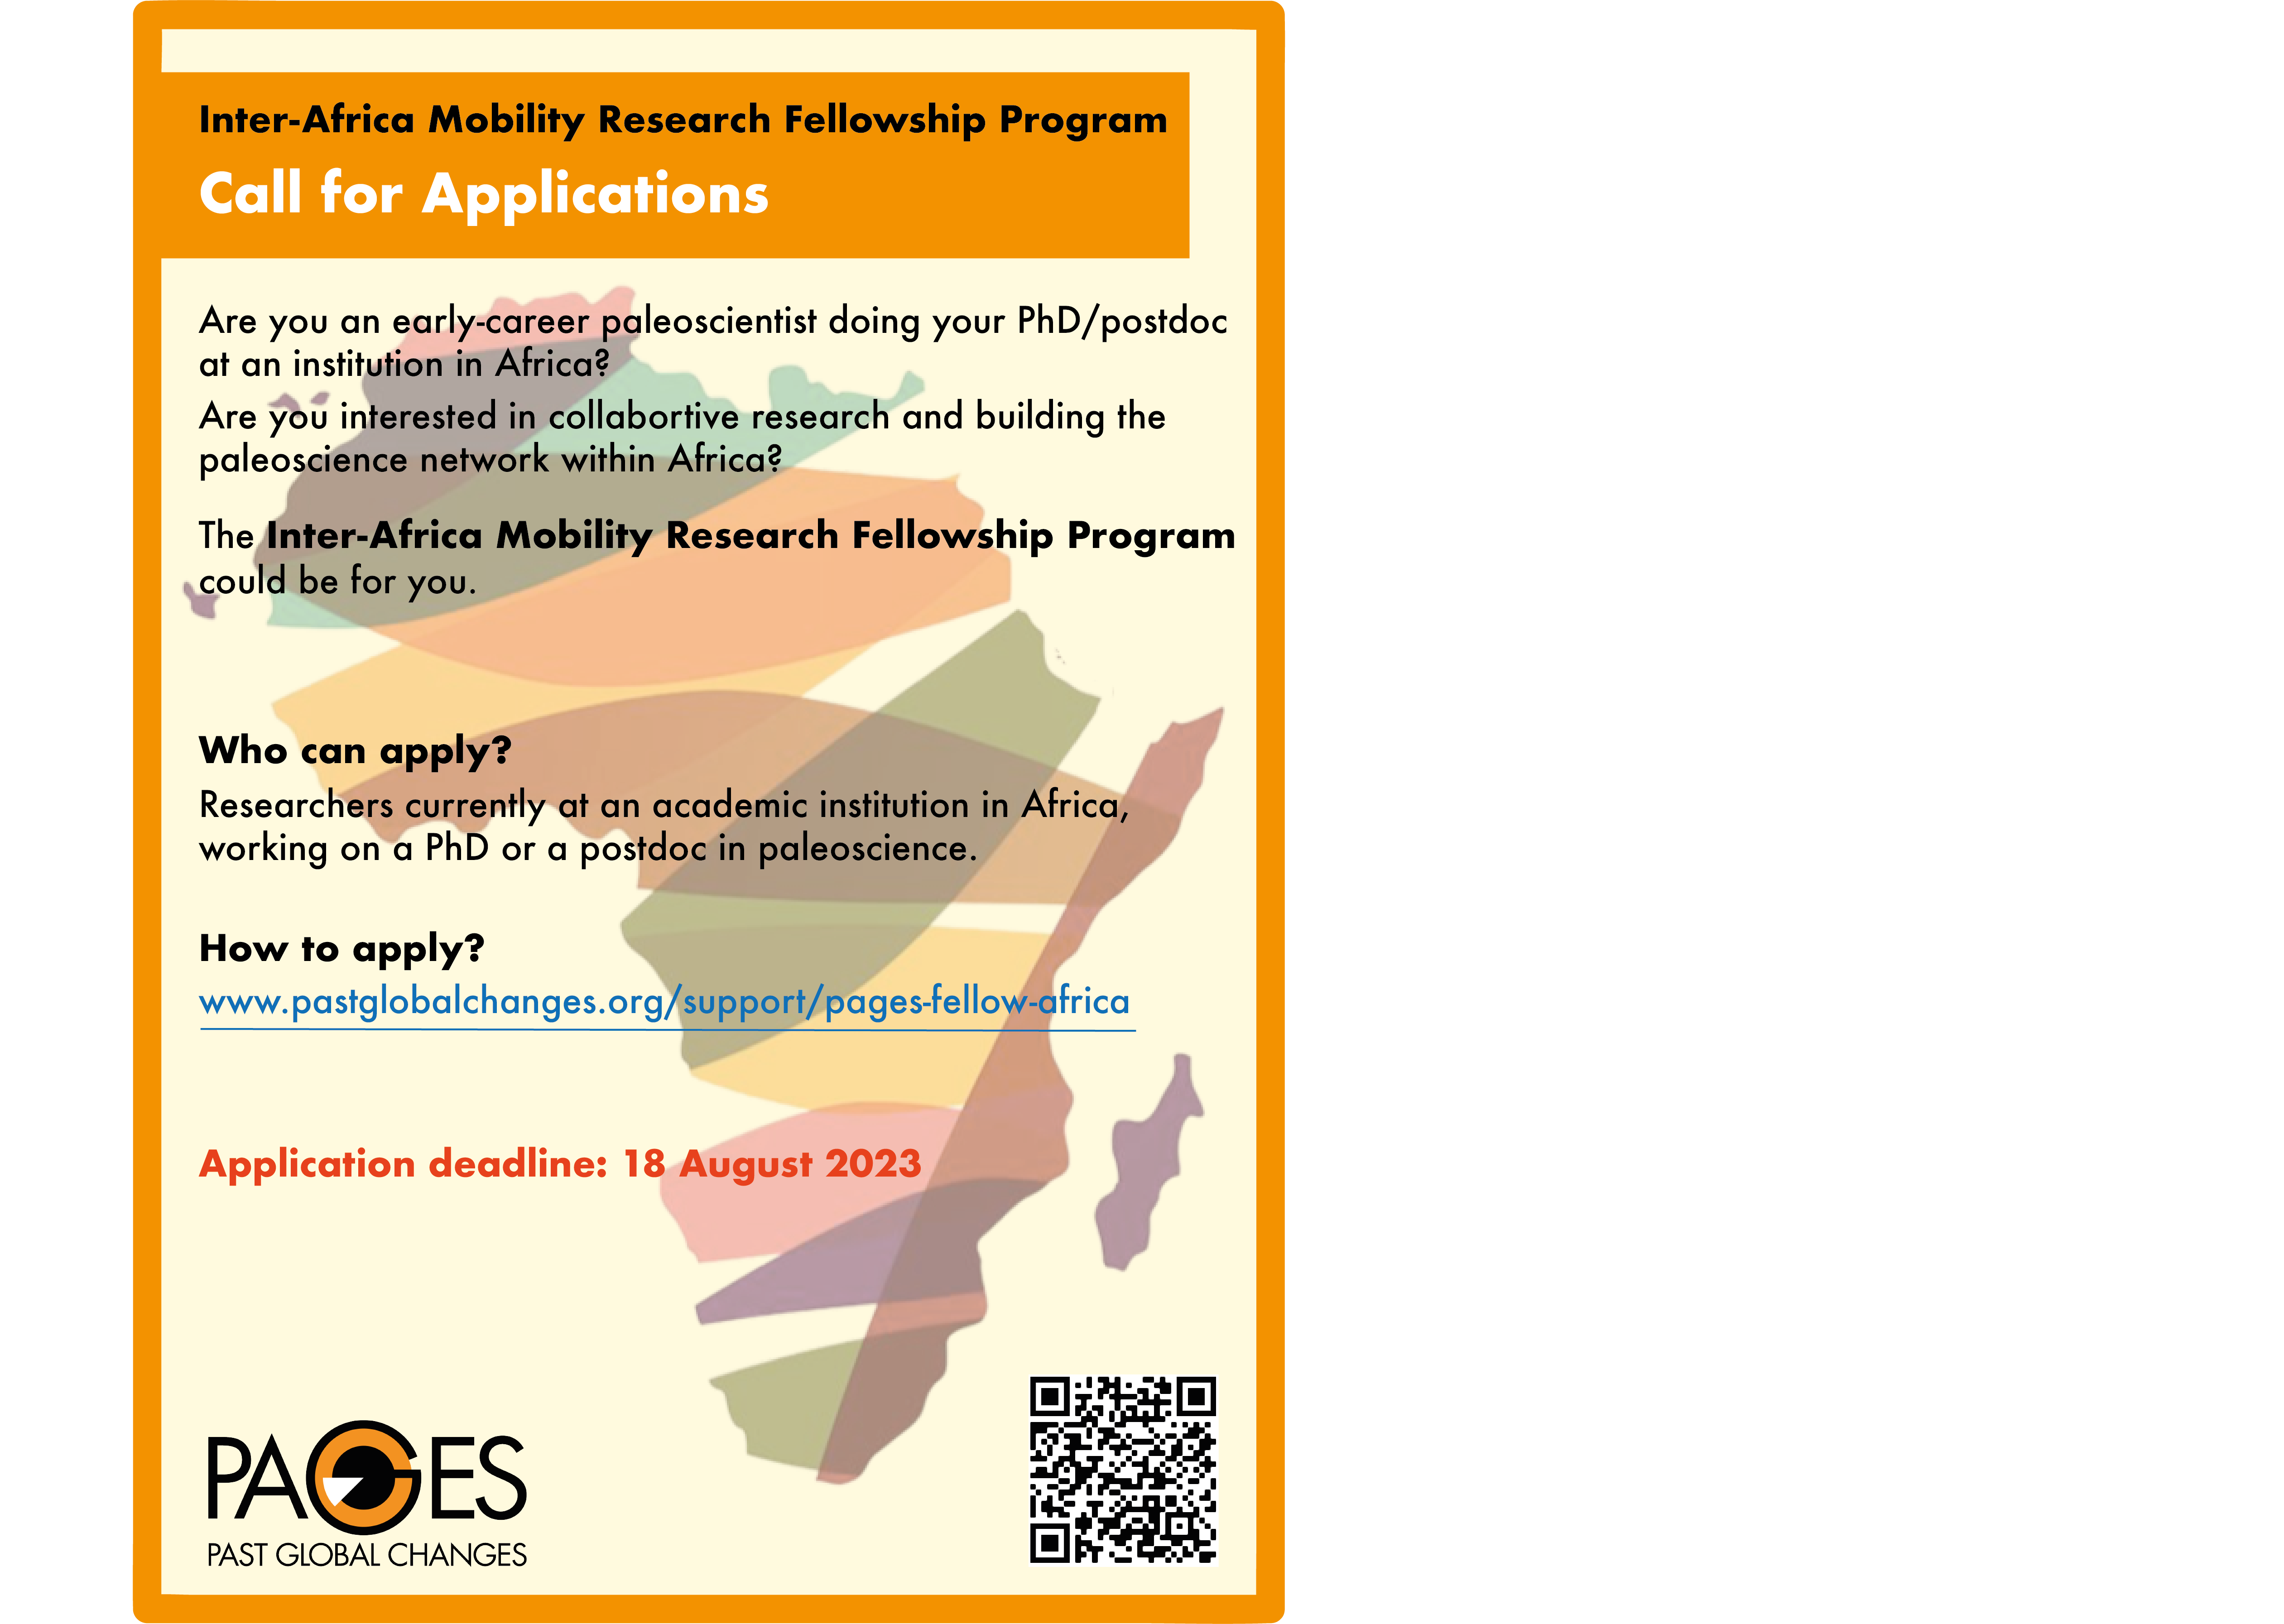 Applications for the Academic English Program for Researchers